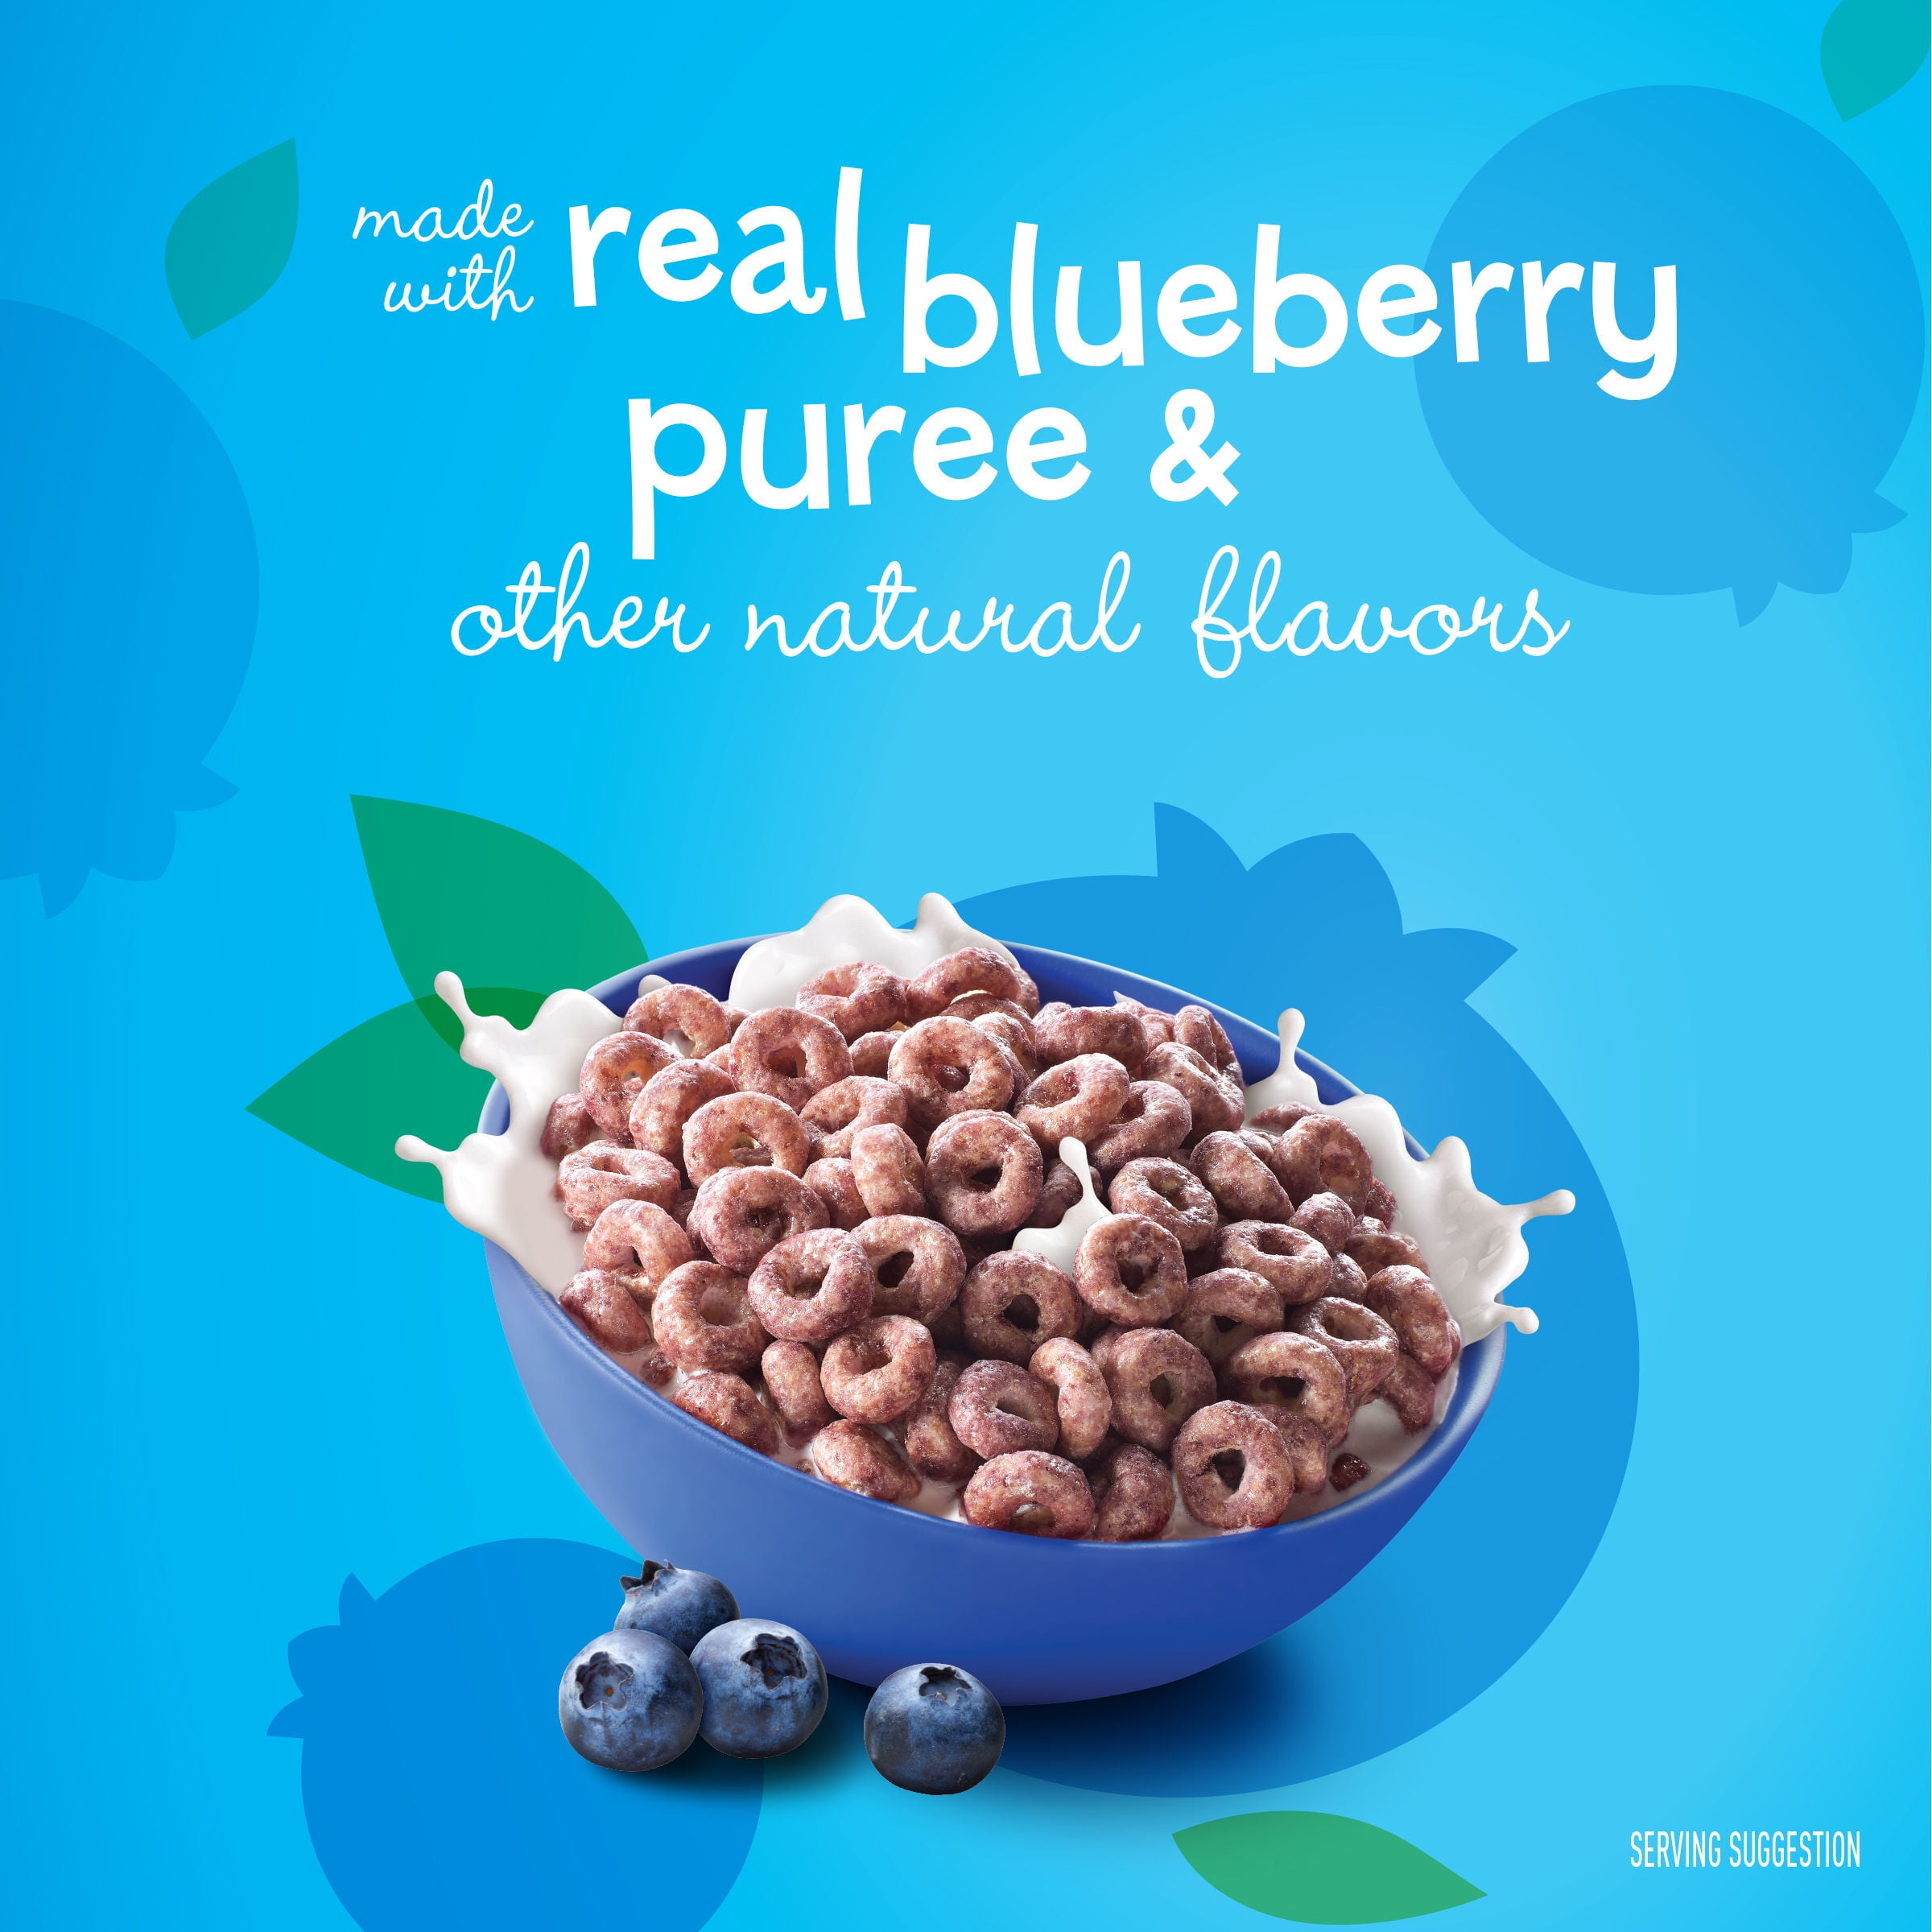 IHOP Blueberry and Syrup Flavored Breakfast Cereal, 19 OZ